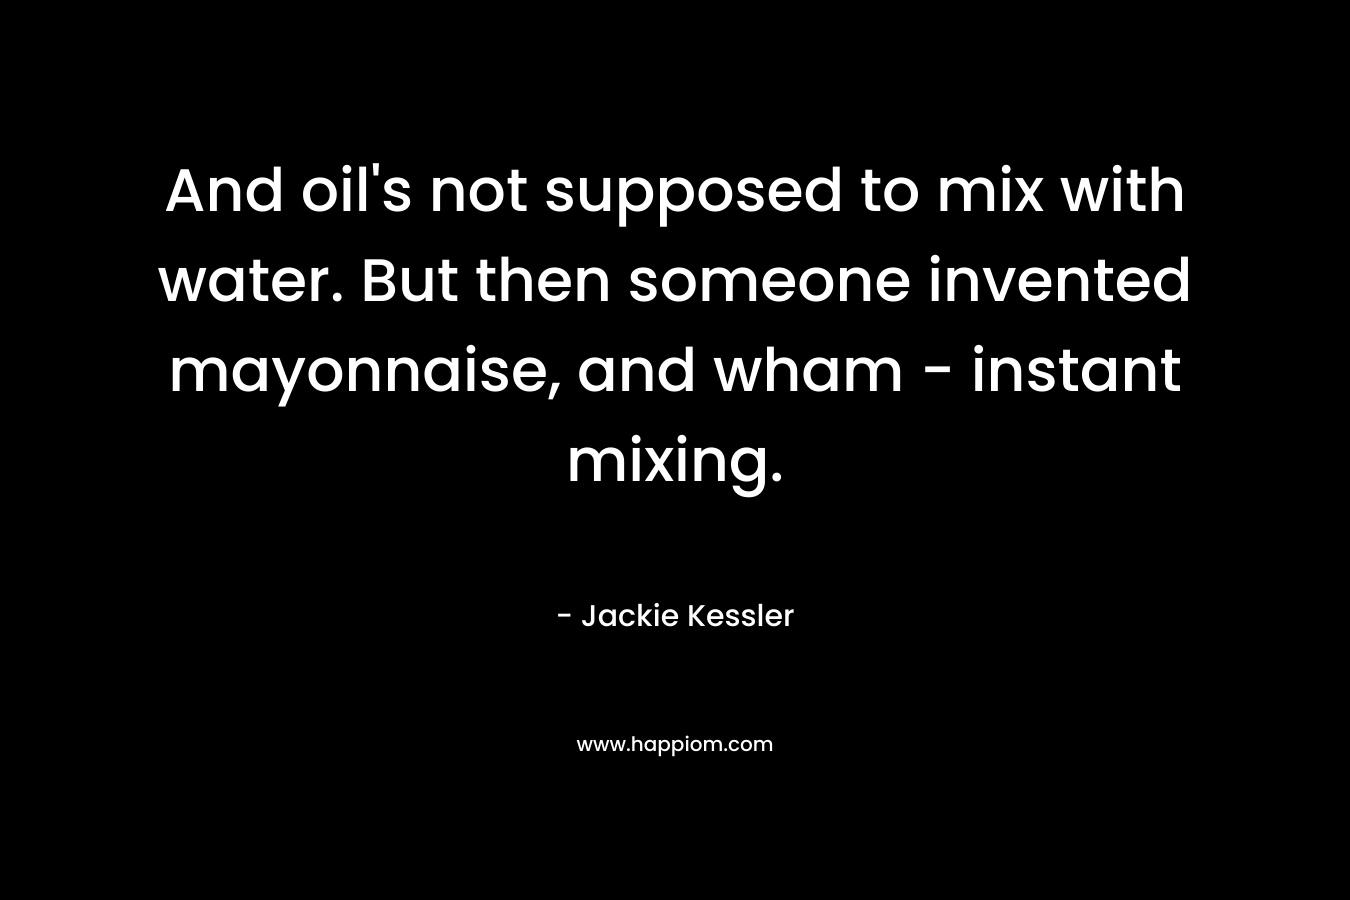 And oil's not supposed to mix with water. But then someone invented mayonnaise, and wham - instant mixing.